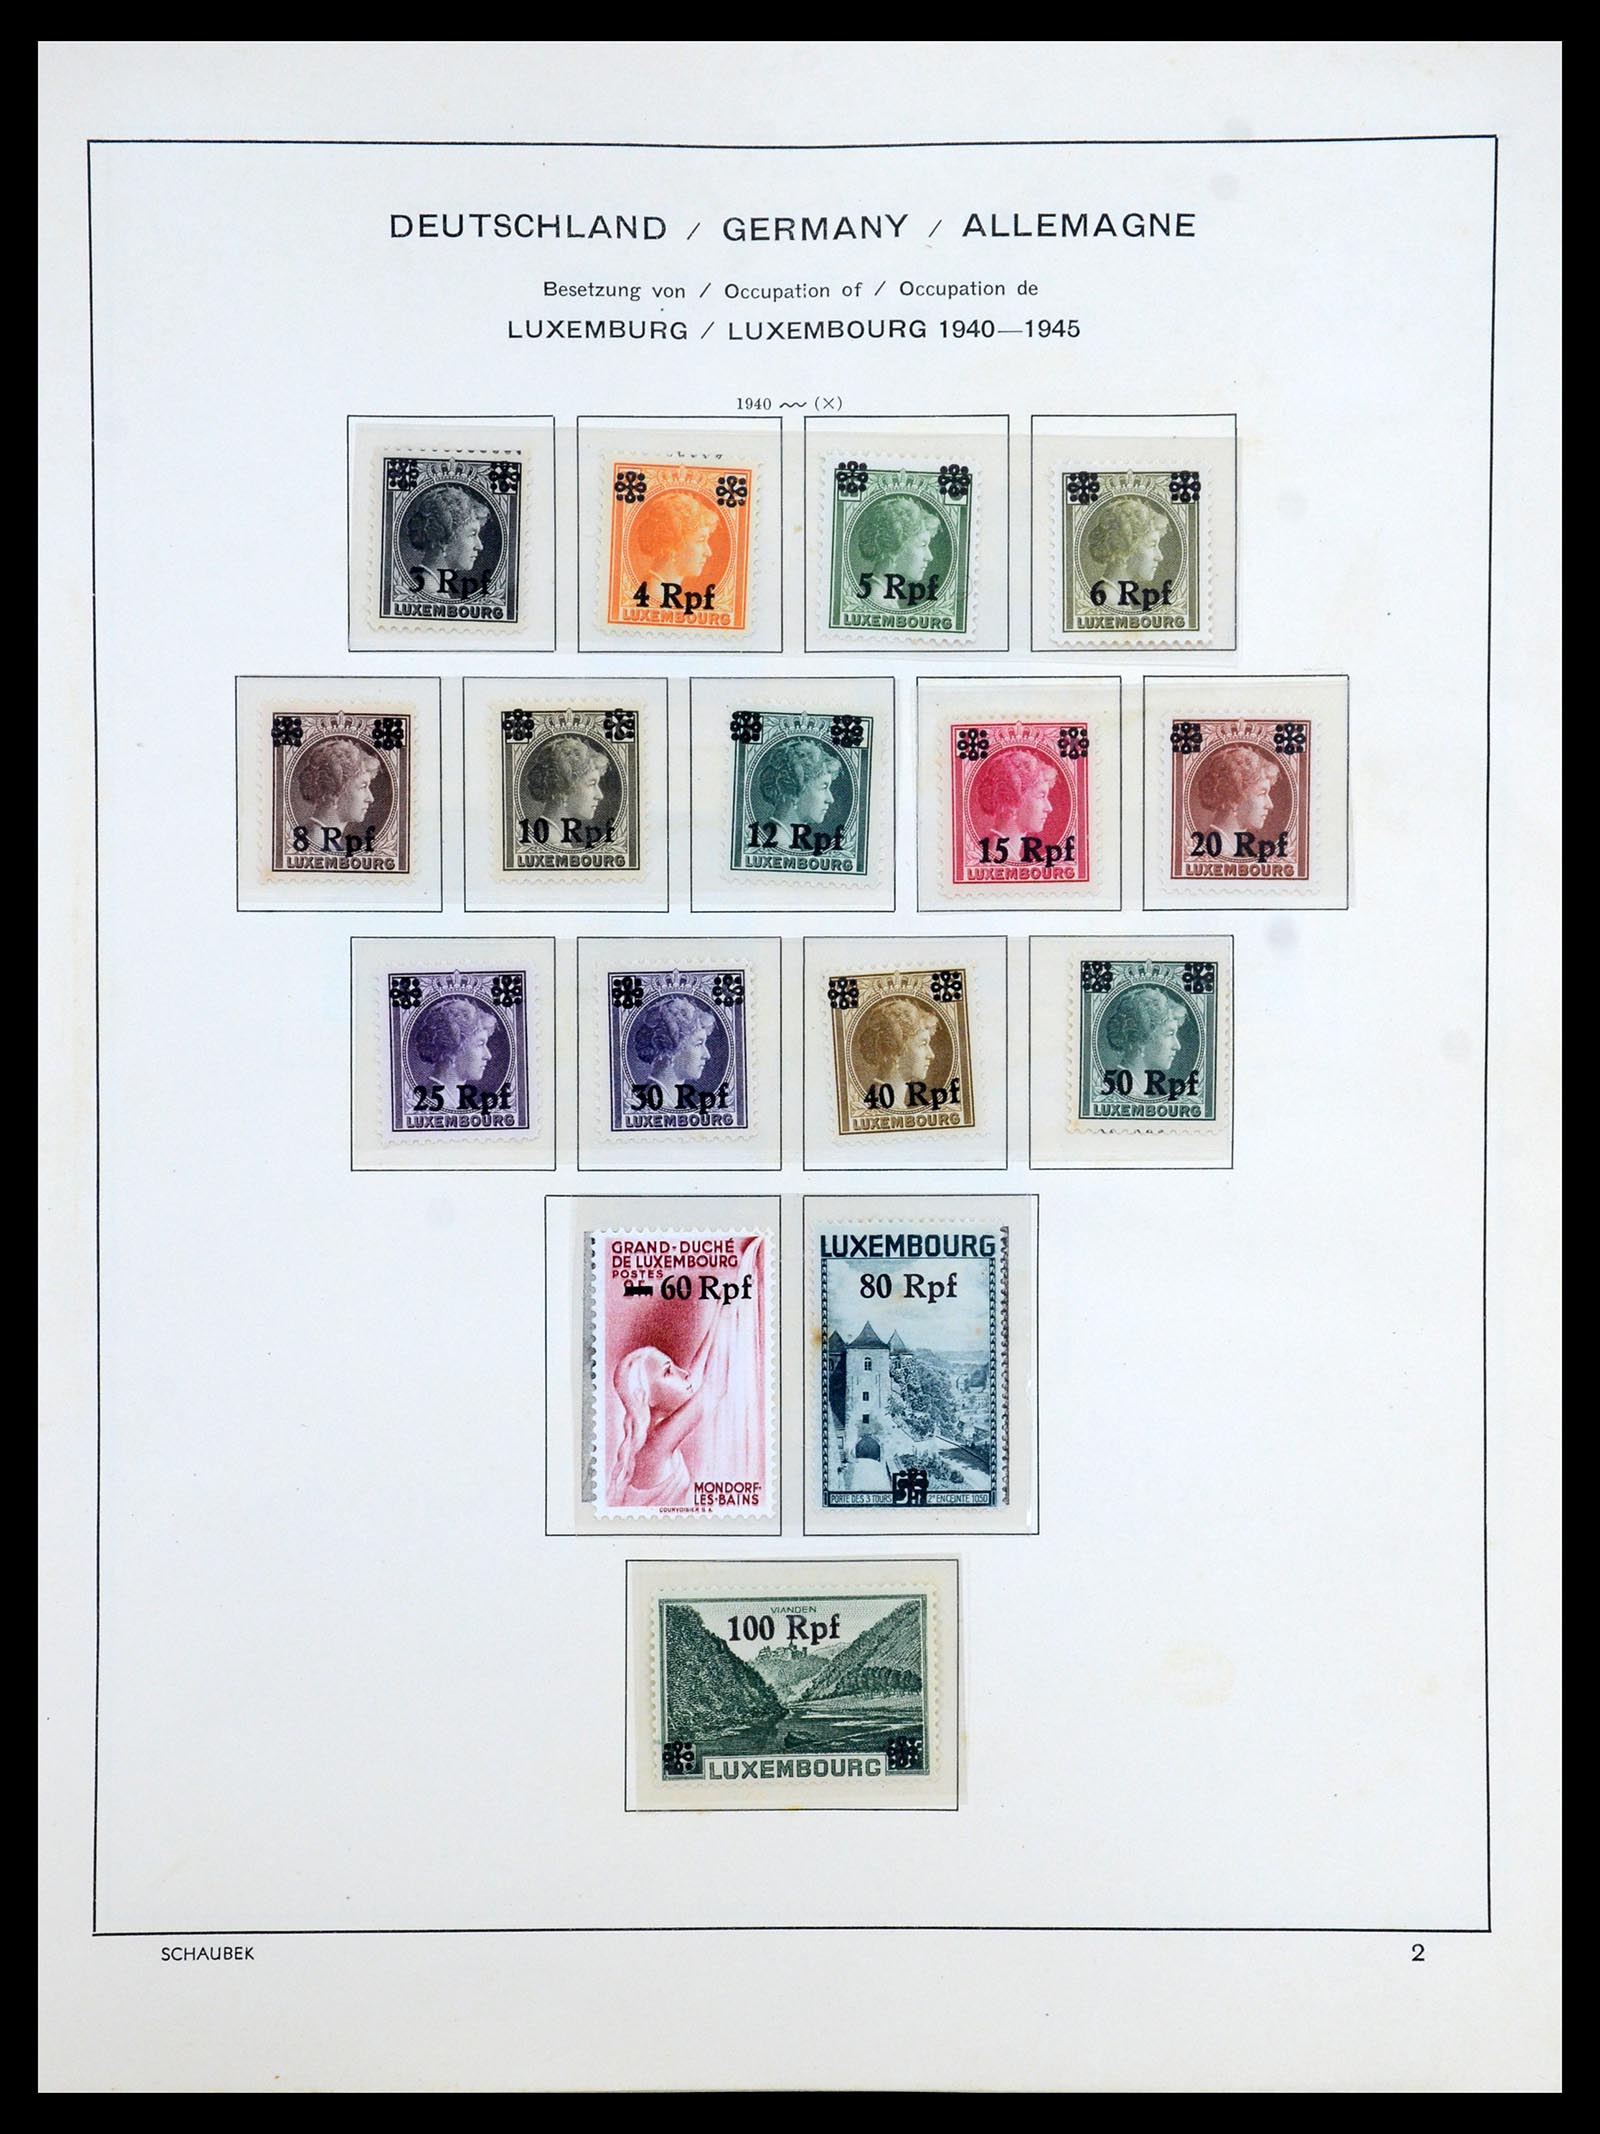 35964 005 - Stamp collection 35964 Germany occupations WW II 1939-1945.